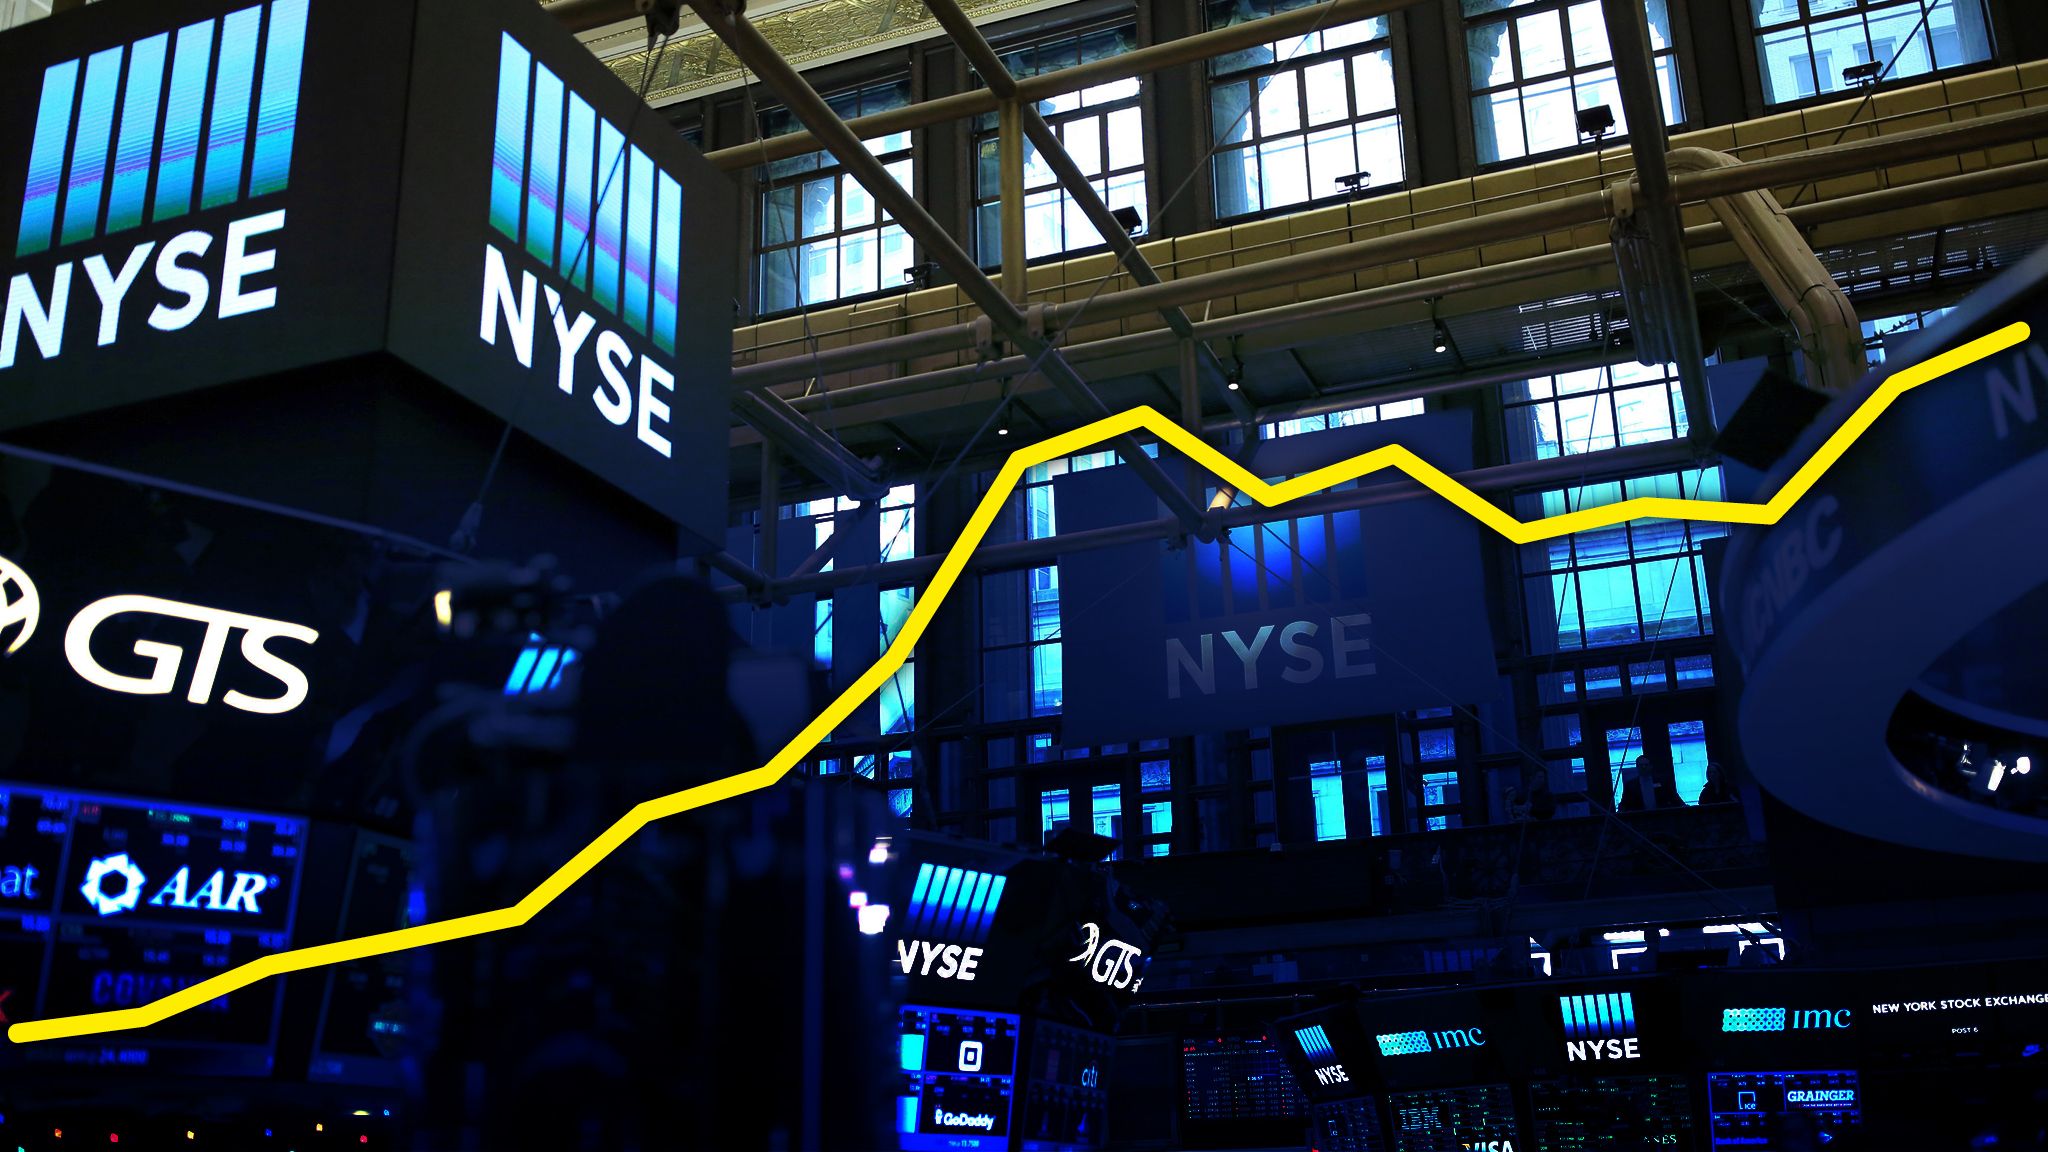 NYSE Wallpaper Free NYSE Background